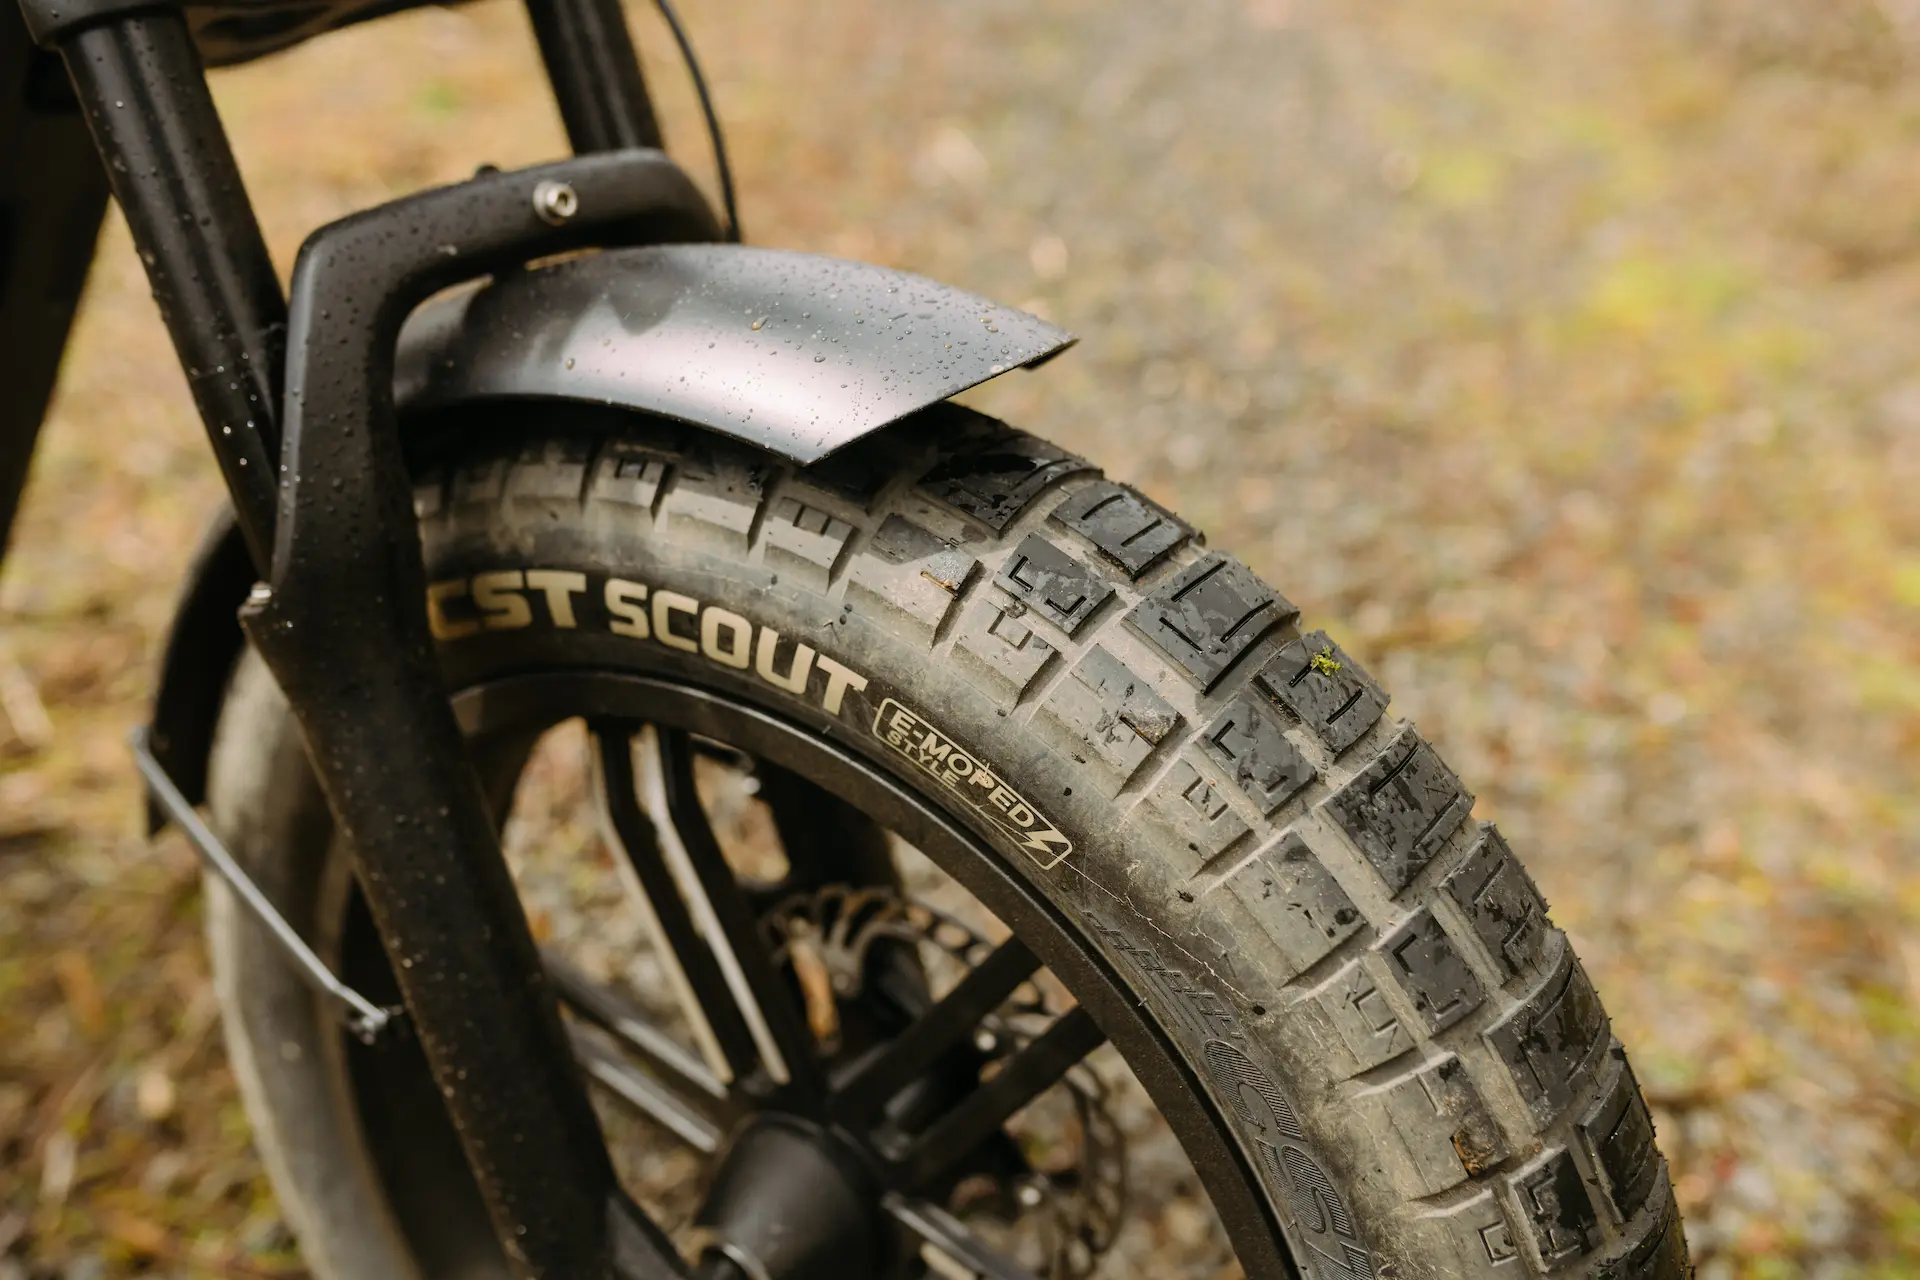 CST Scout eMoped tires